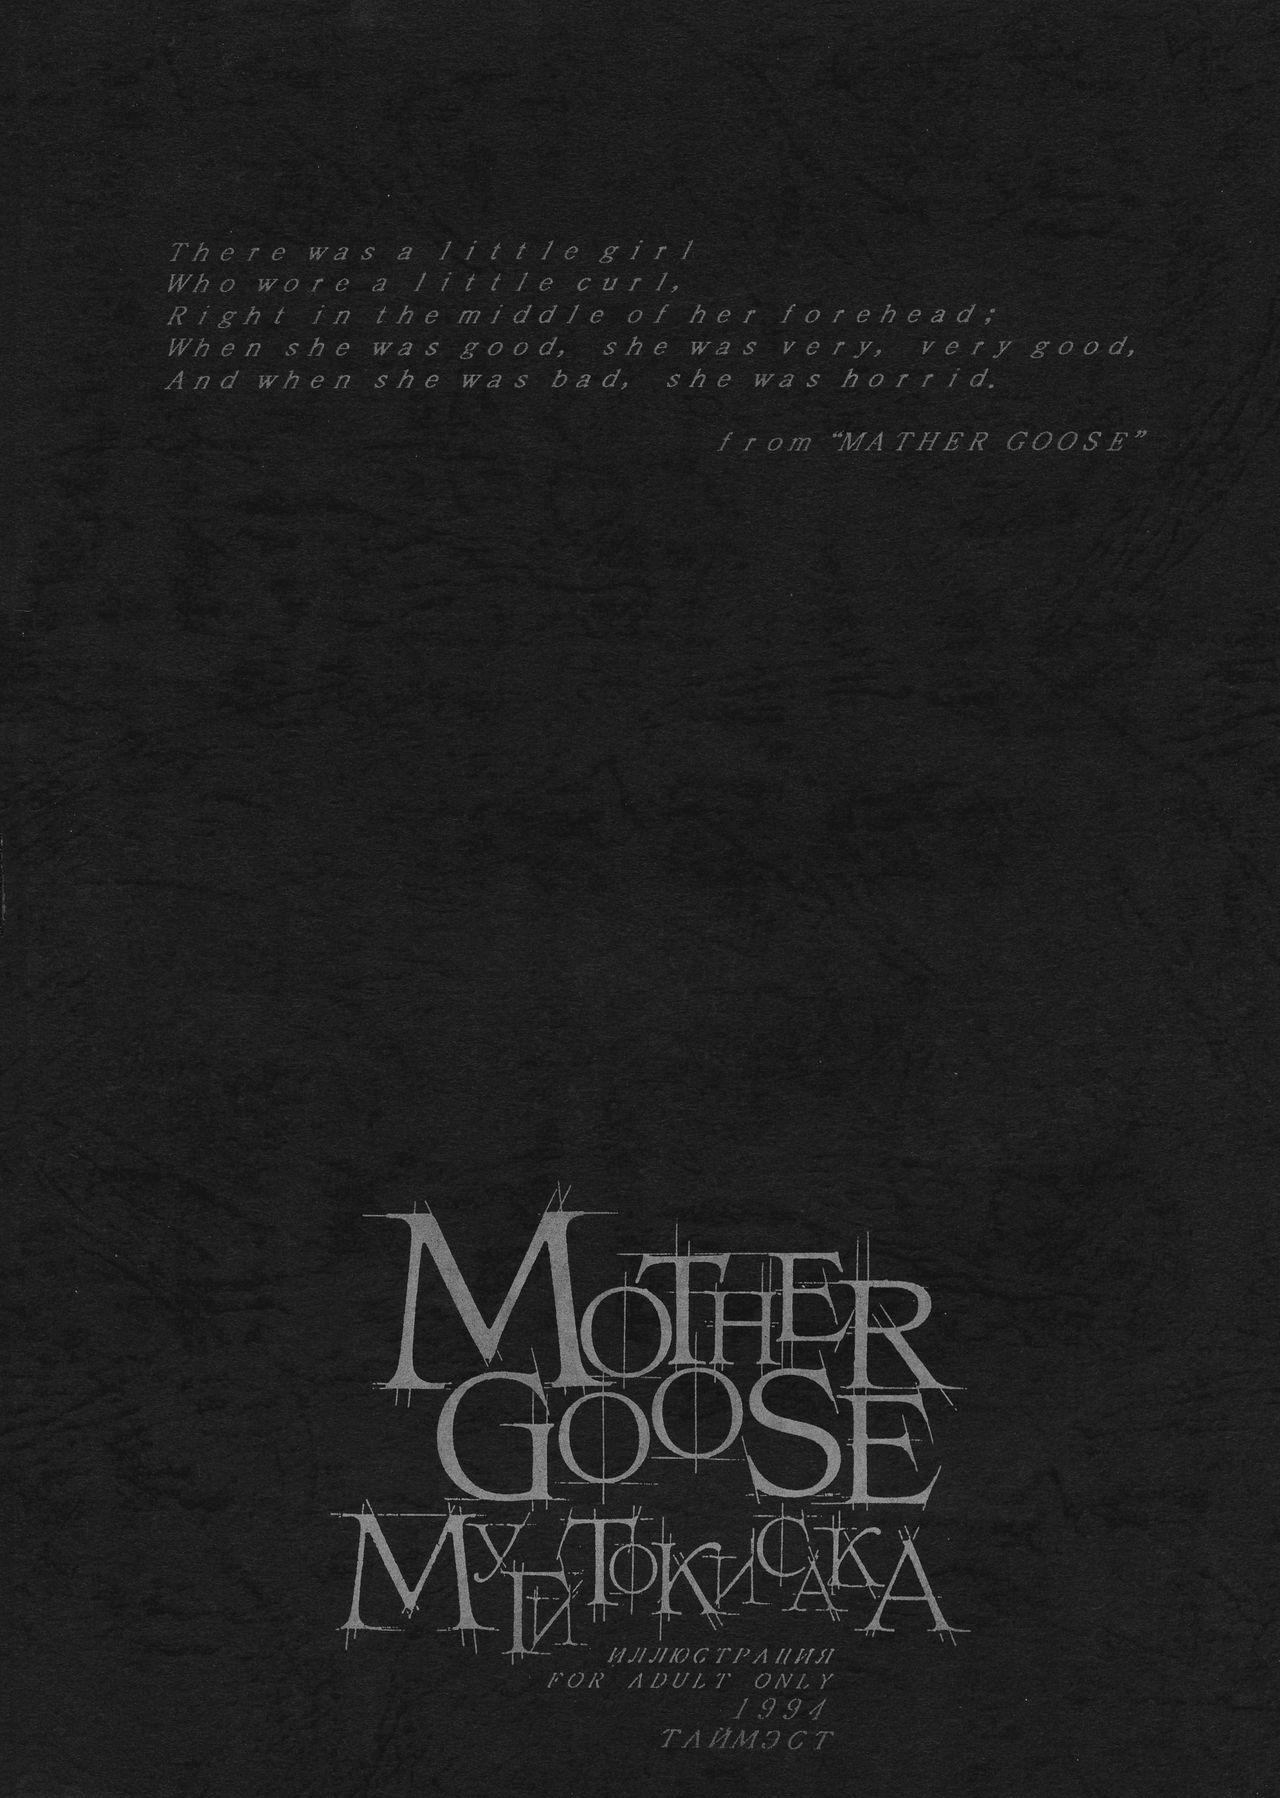 MOTHER GOOSE 45